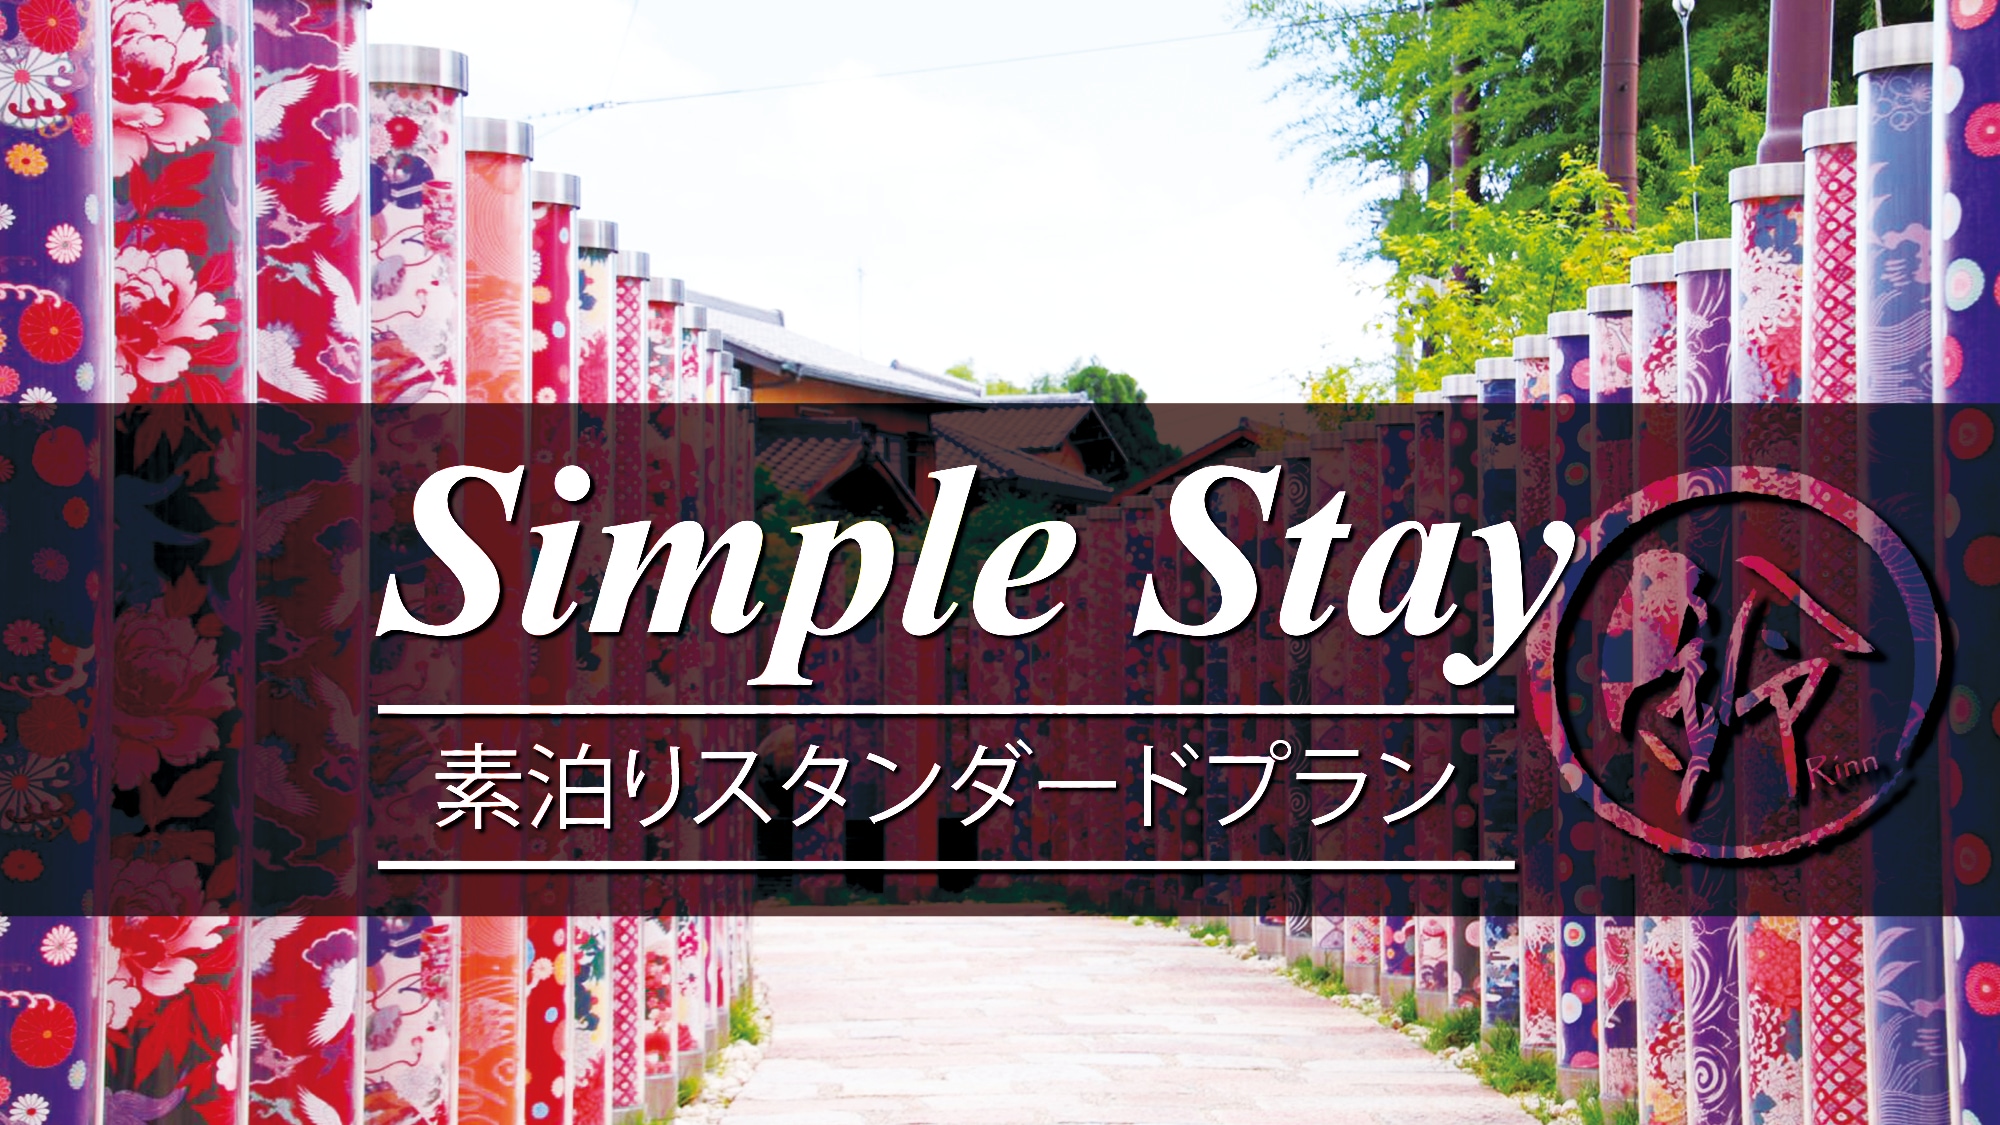 Simple stay